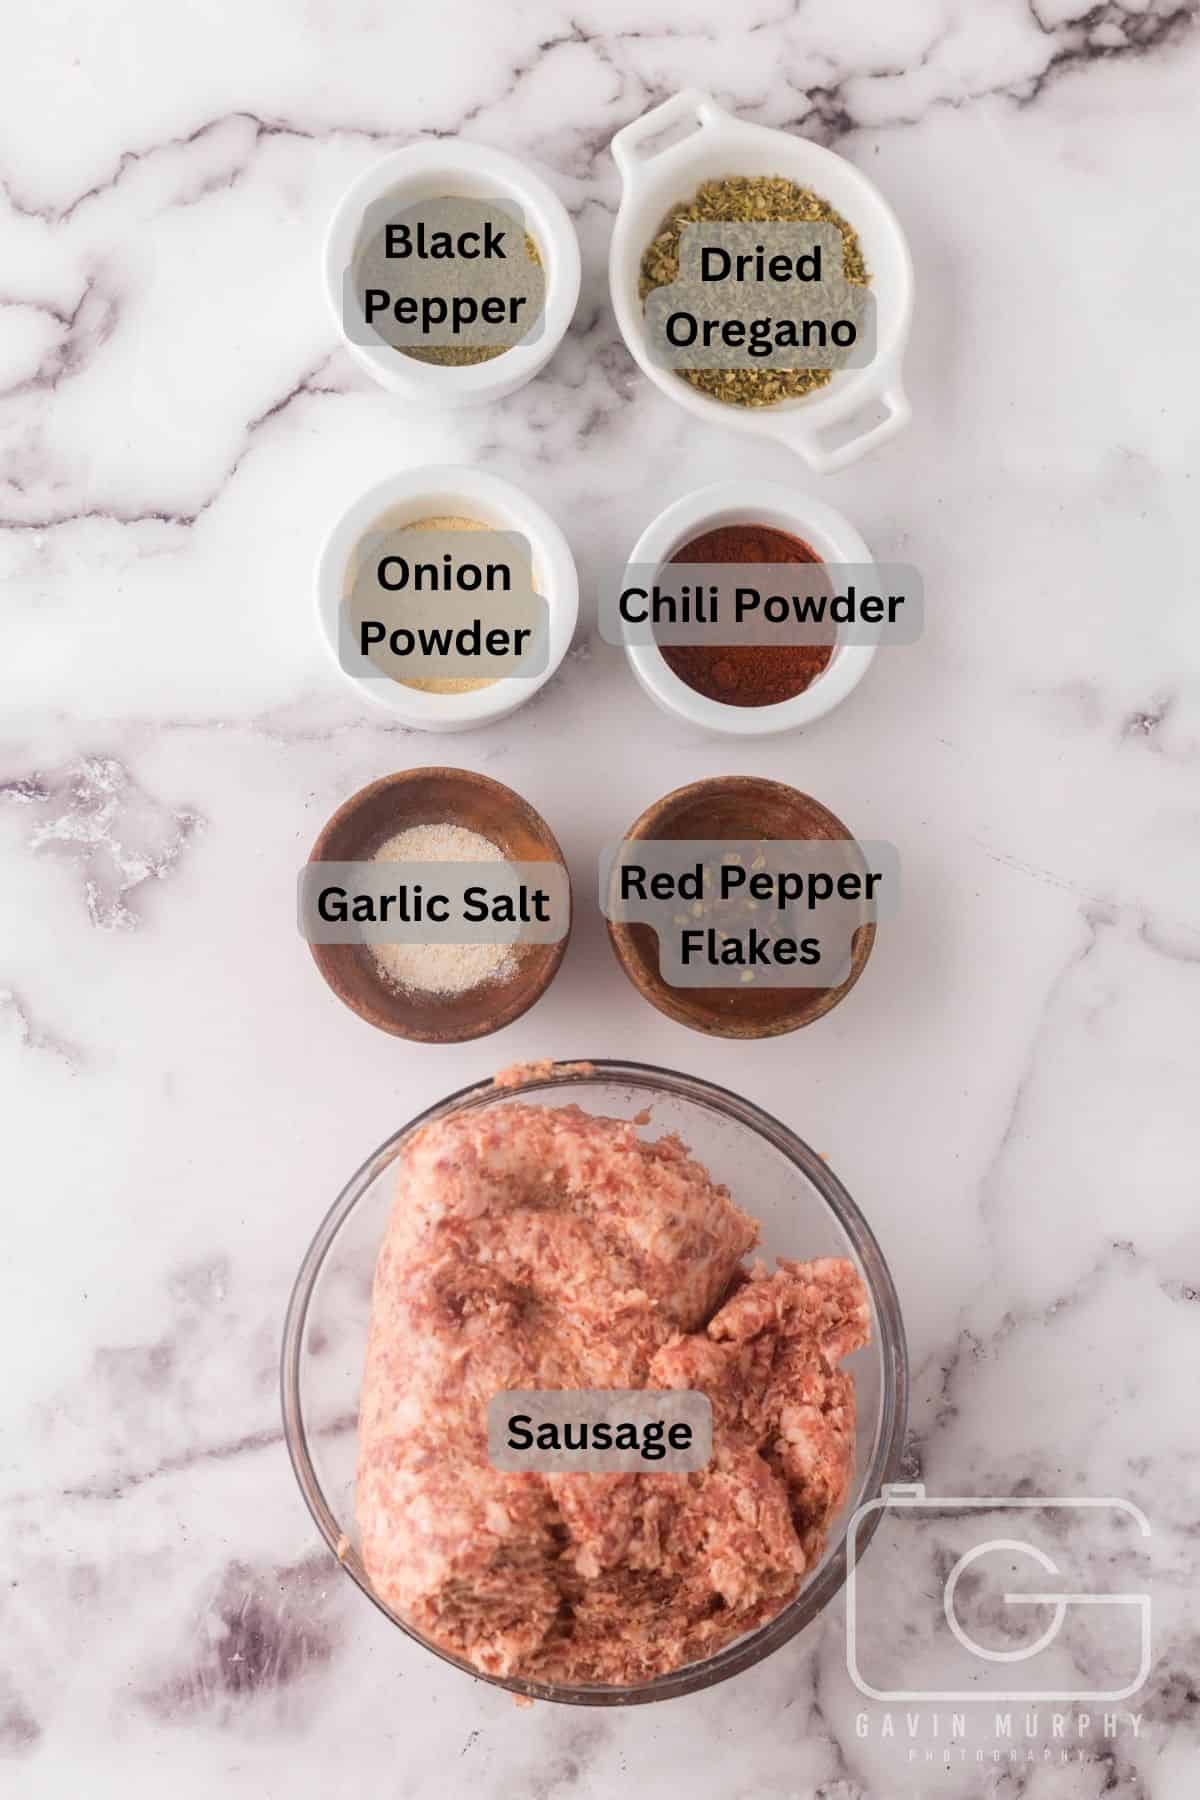 Digitally labeled ingredients that are portioned out in bowls to make breakfast sausage.